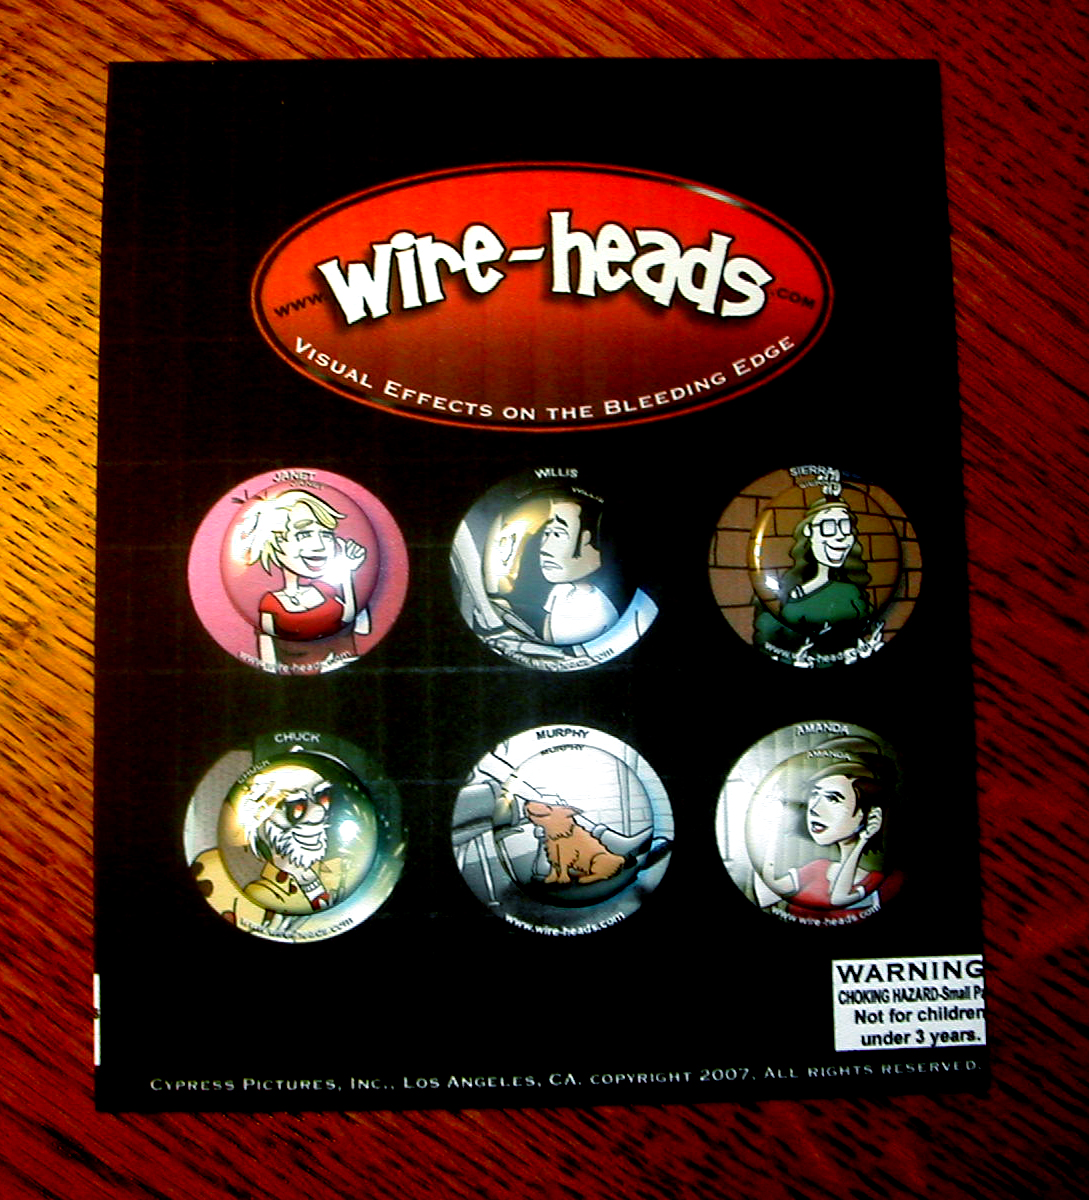 Wireheads' Six-Button Collector's Set